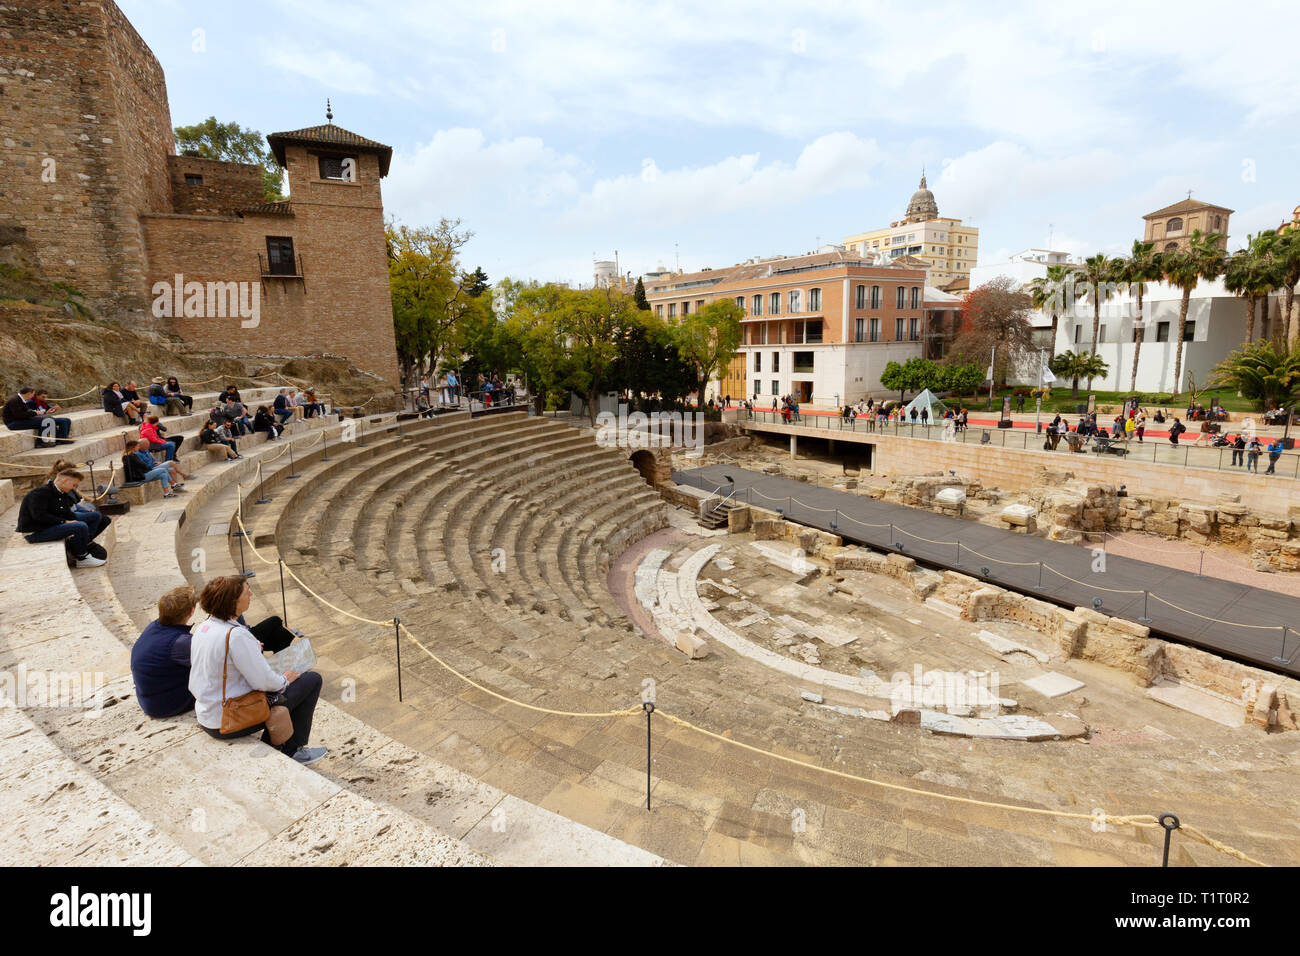 Tourists at the ruins of El Teatro Romano, or Roman Theatre, built in the 1st century BC, Malaga old town, Malaga Spain Stock Photo